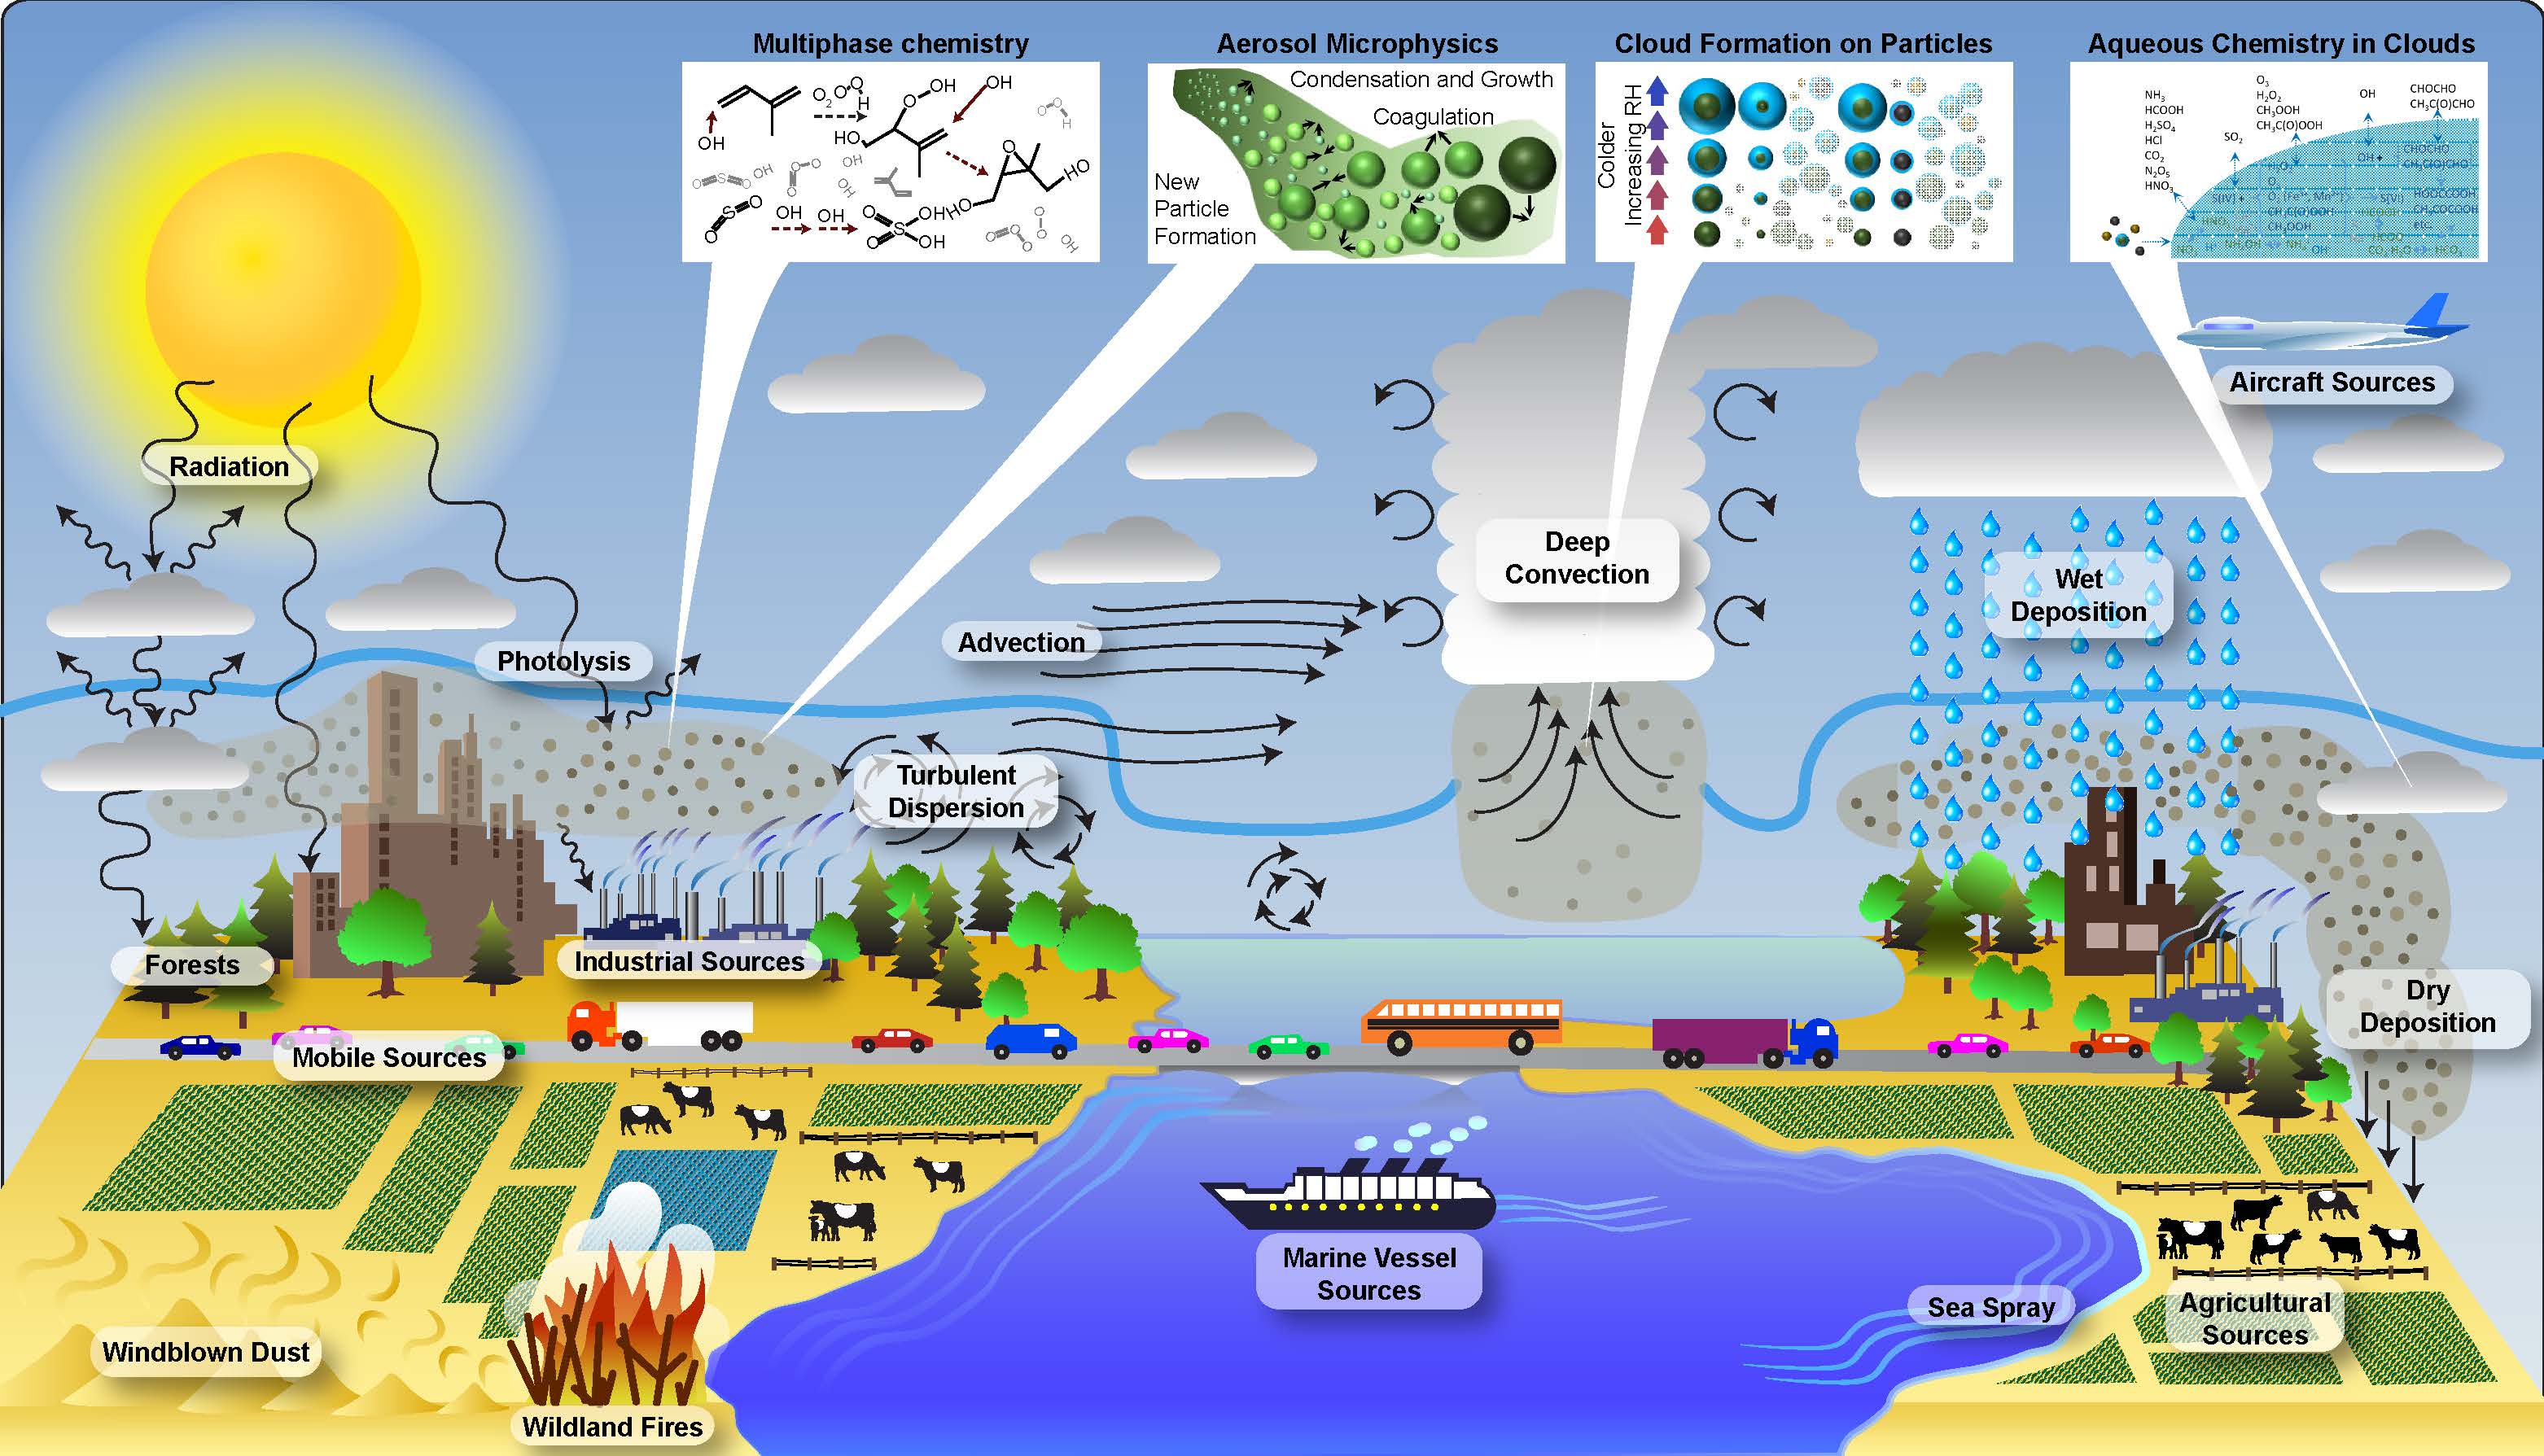 Illustration showing various science concepts incorporated in the CMAQ model system